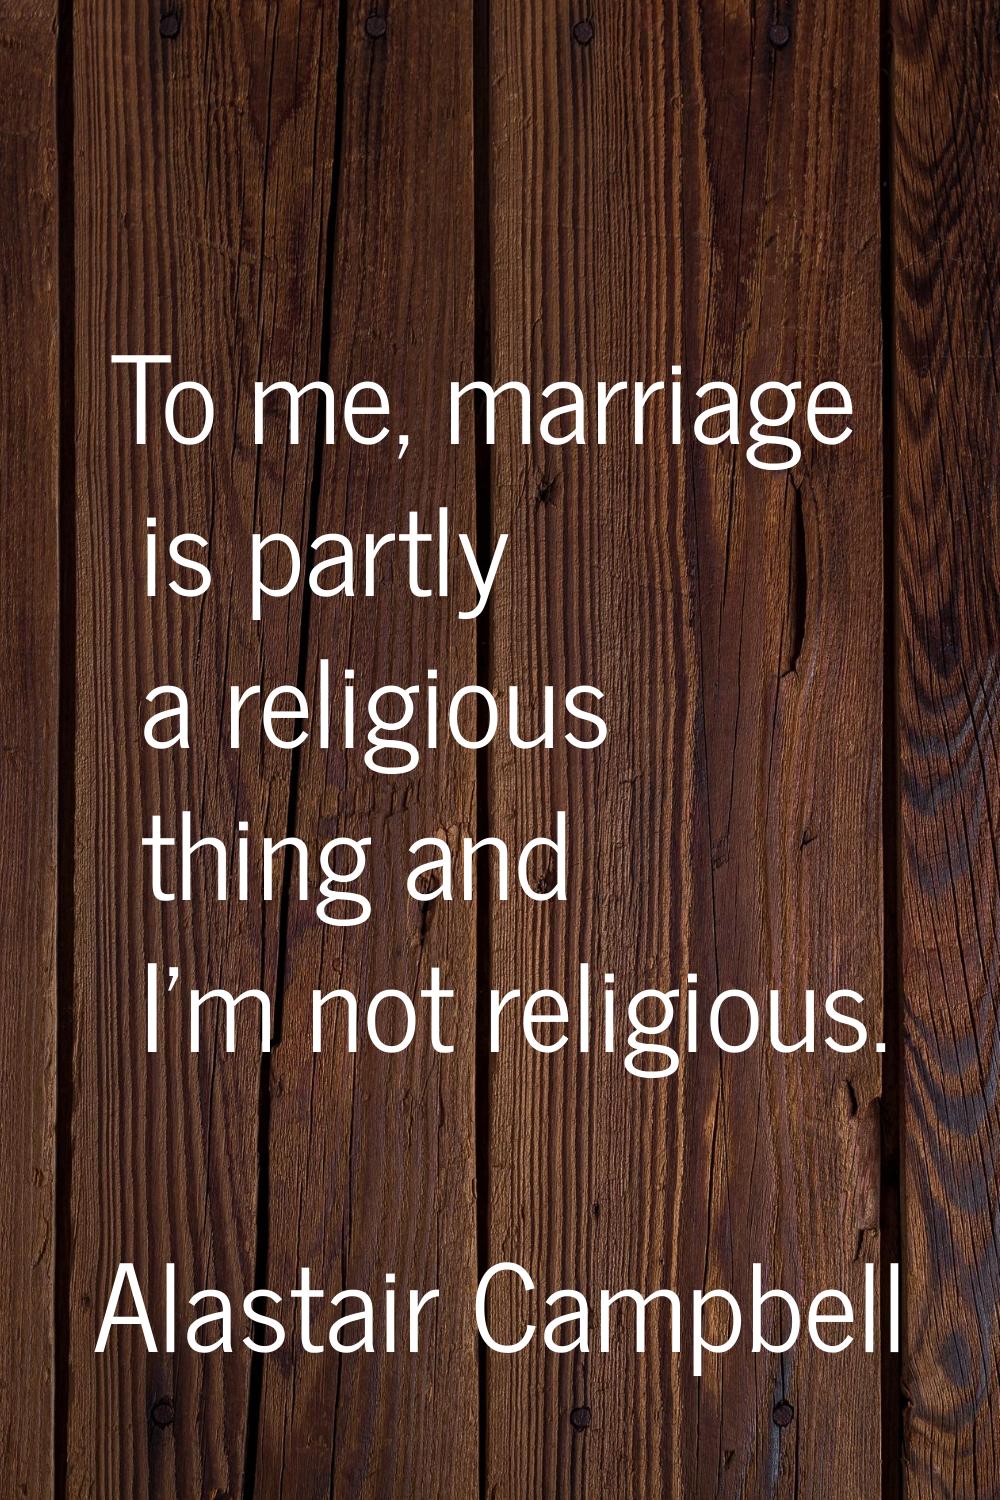 To me, marriage is partly a religious thing and I'm not religious.